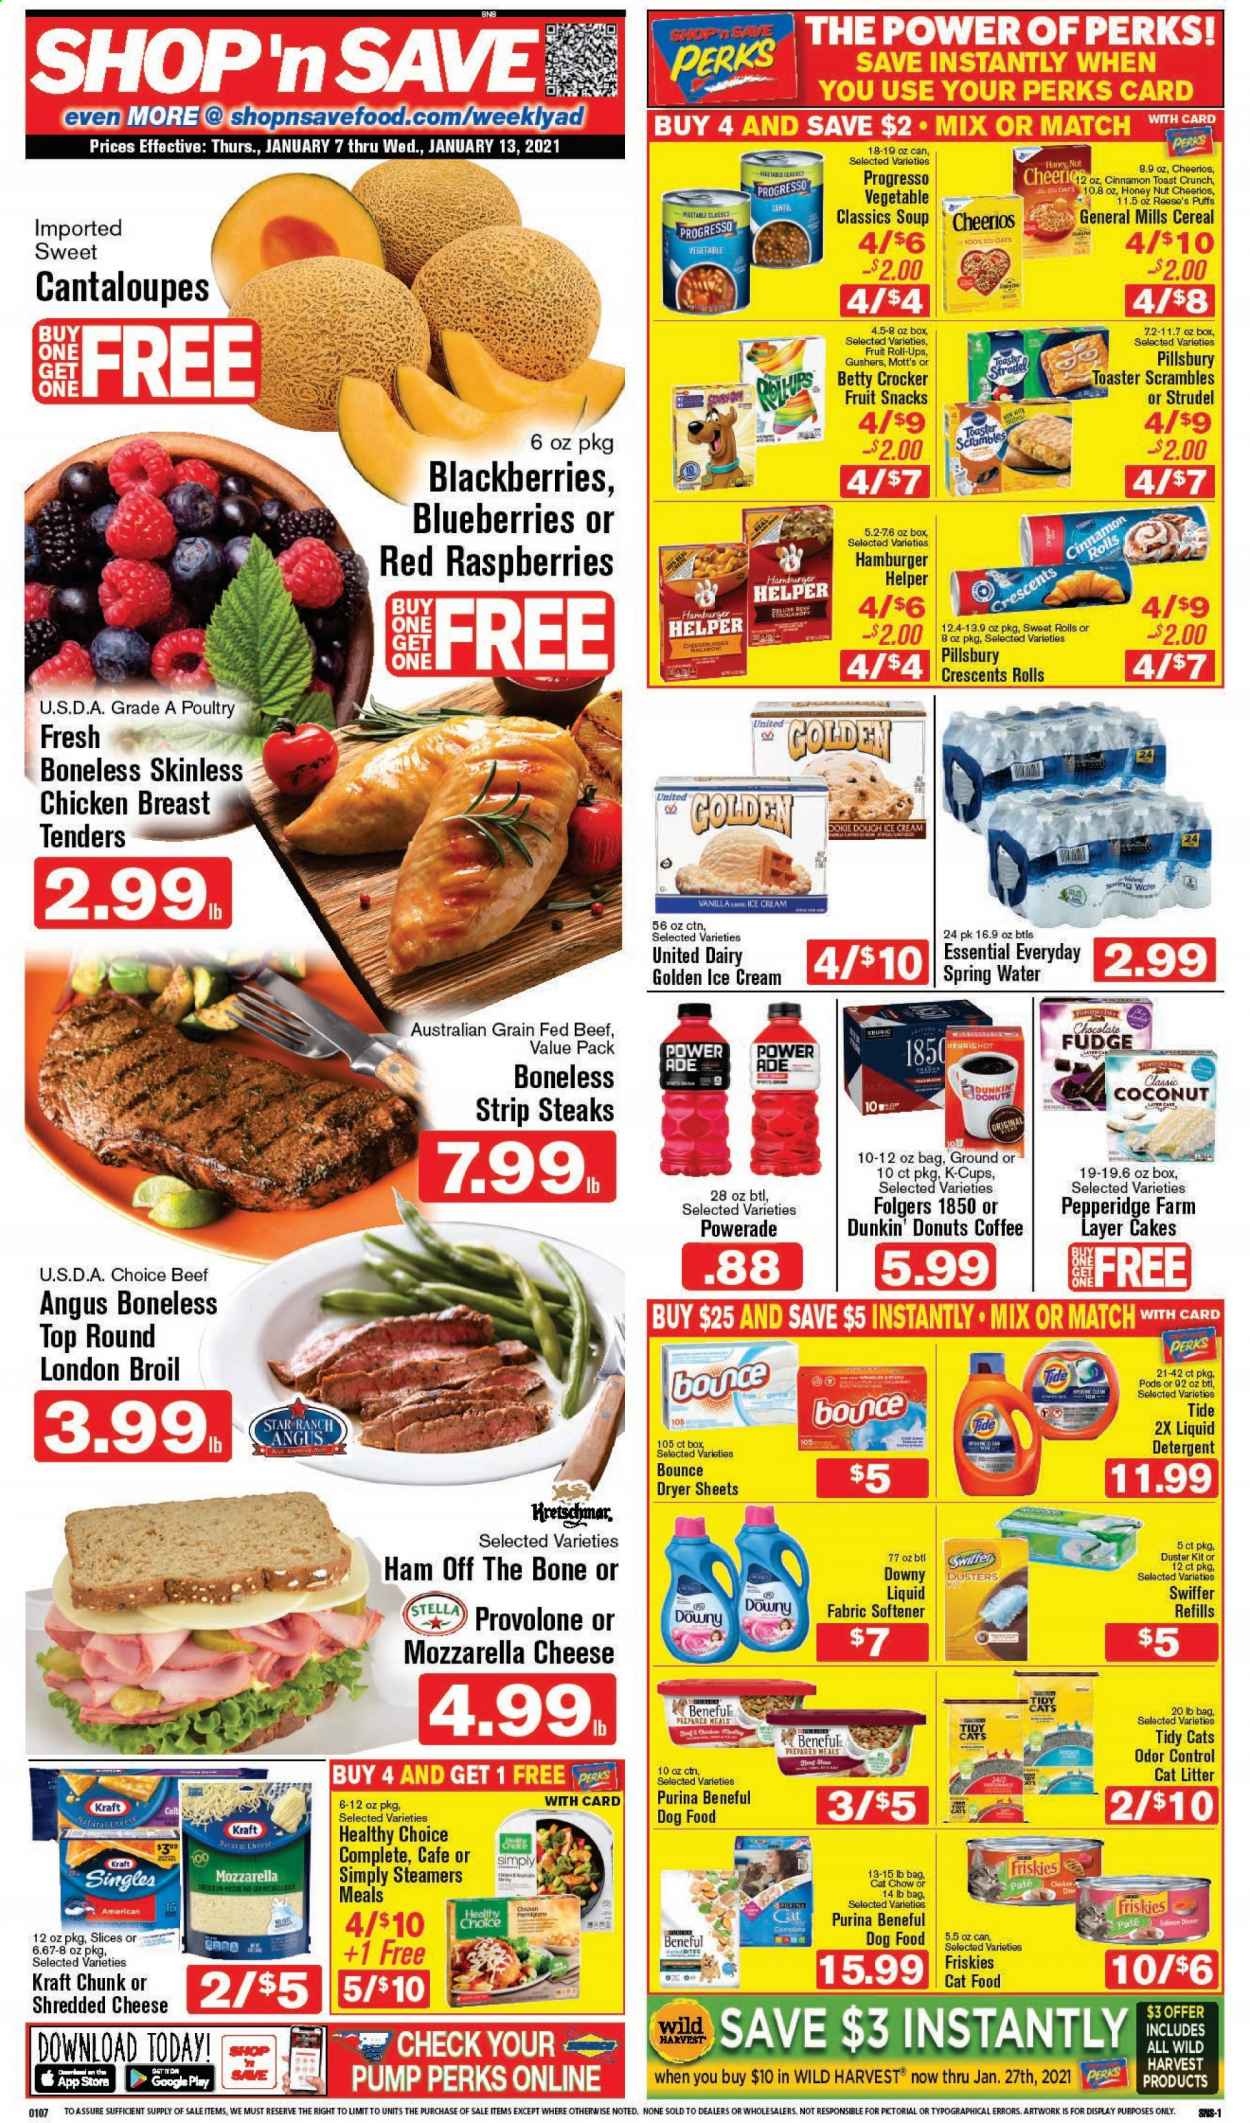 thumbnail - Shop ‘n Save Flyer - 01/07/2021 - 01/13/2021 - Sales products - cantaloupe, blackberries, blueberries, raspberries, toast bread, cinnamon roll, puffs, cake, donut, strudel, Dunkin' Donuts, coconut, chicken breasts, beef meat, steak, striploin steak, salmon, soup, Pillsbury, Progresso, Healthy Choice, Kraft®, ham, ham off the bone, mozzarella, shredded cheese, ice cream, Reese's, fudge, chocolate, fruit snack, Wild Harvest, oats, cereals, Cheerios, macaroni, Powerade, Mott's, spring water, coffee, Folgers, coffee capsules, K-Cups, Keurig, detergent, Swiffer, Tide, fabric softener, Bounce, dryer sheets, liquid detergent. Page 1.